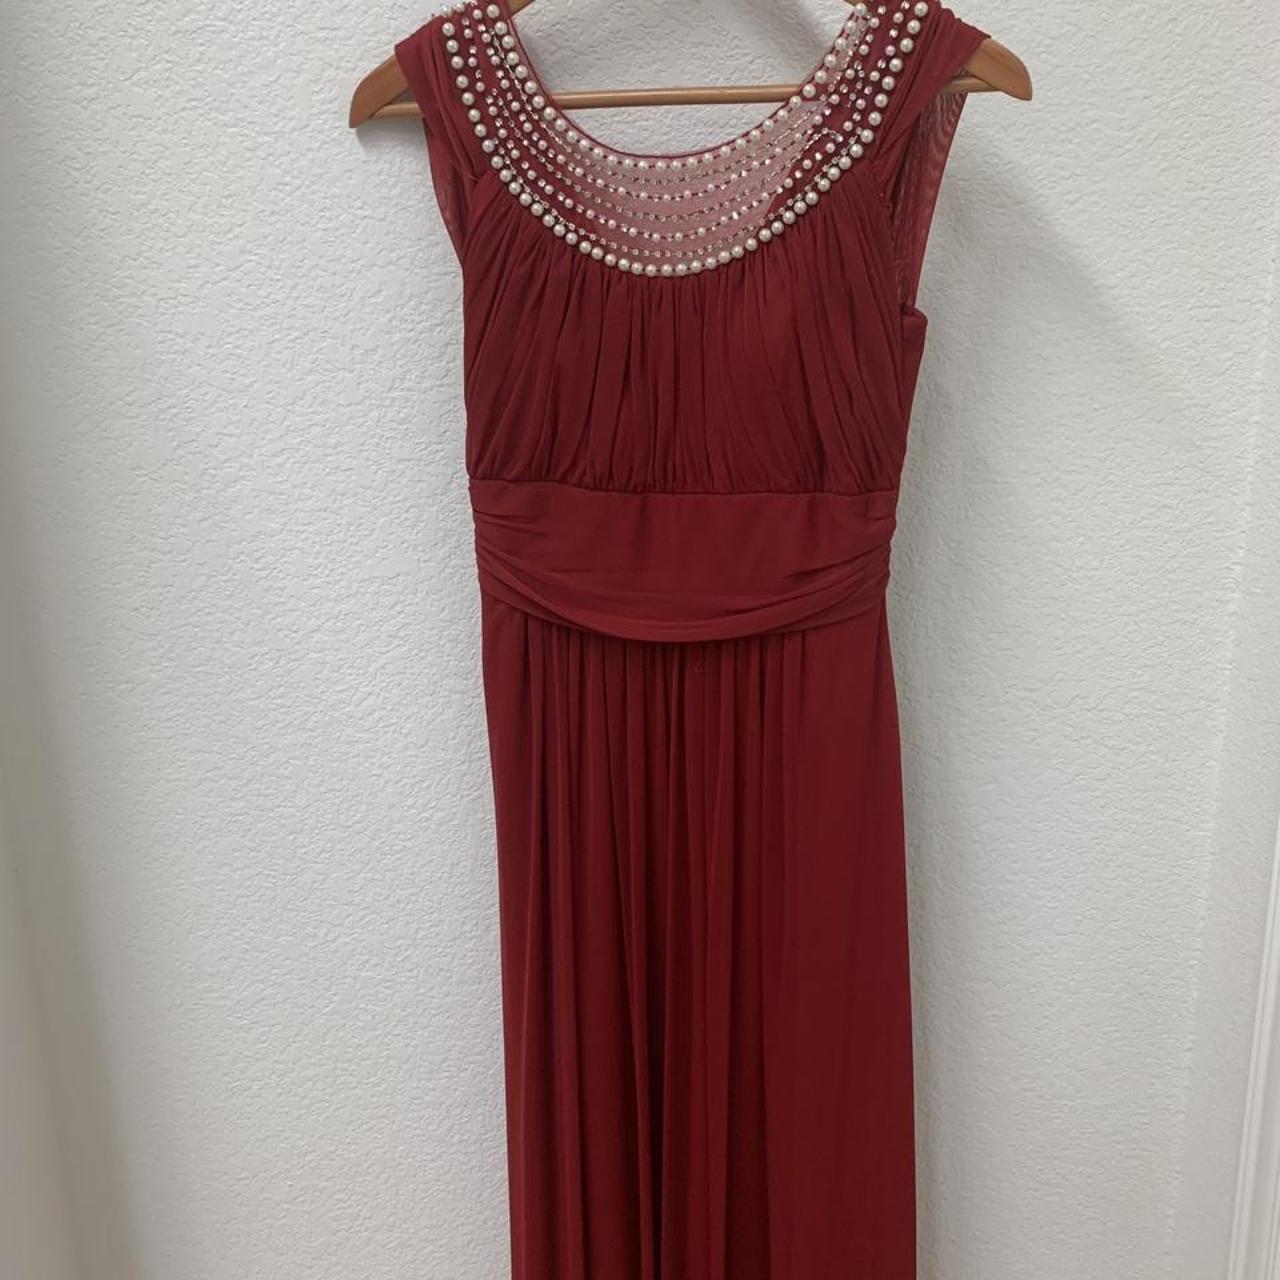 Women's Red and Burgundy Dress (2)